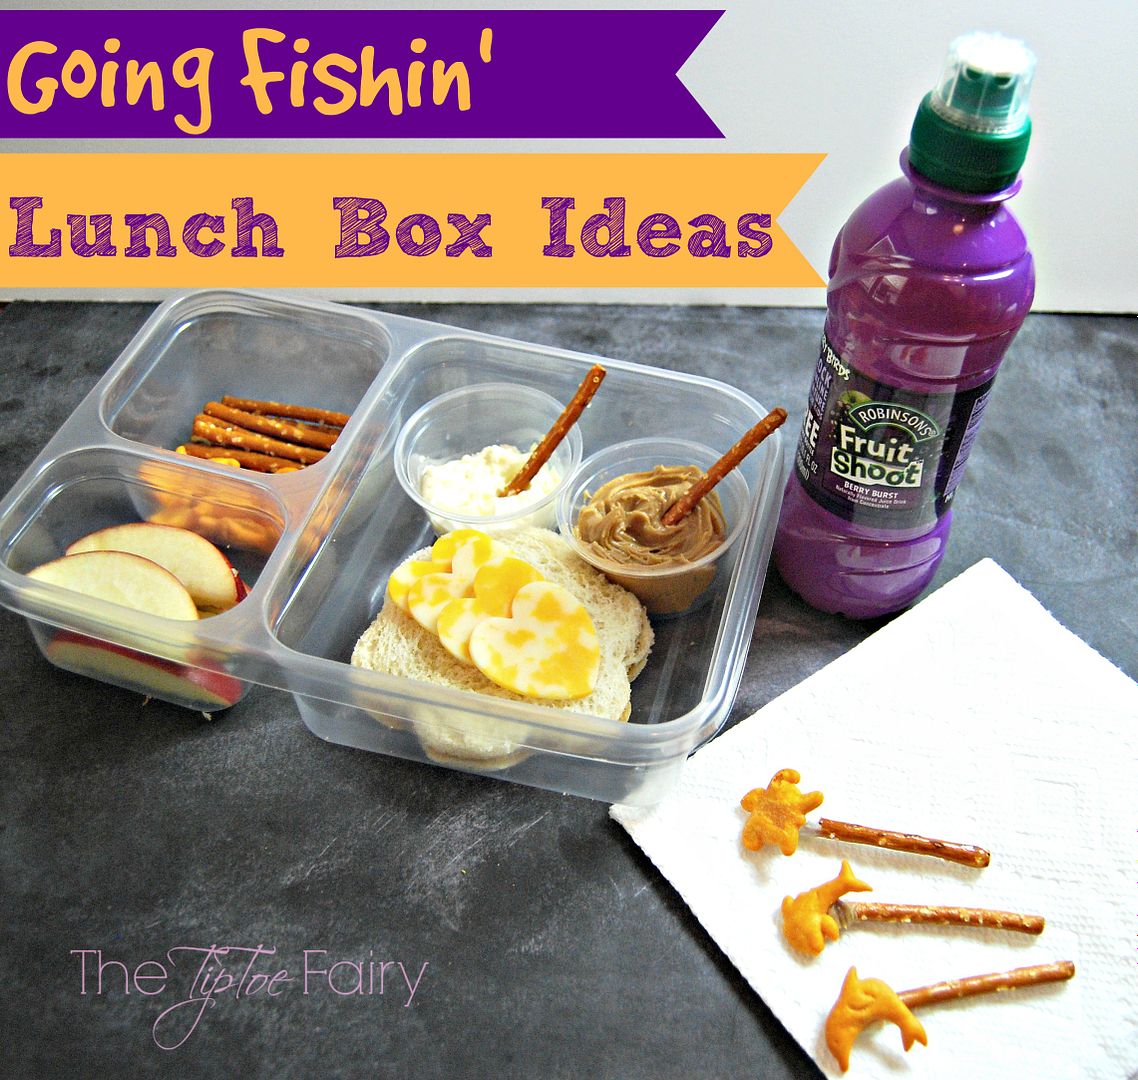 Lunch Box Ideas with Fruit Shoot | The TipToe Fairy